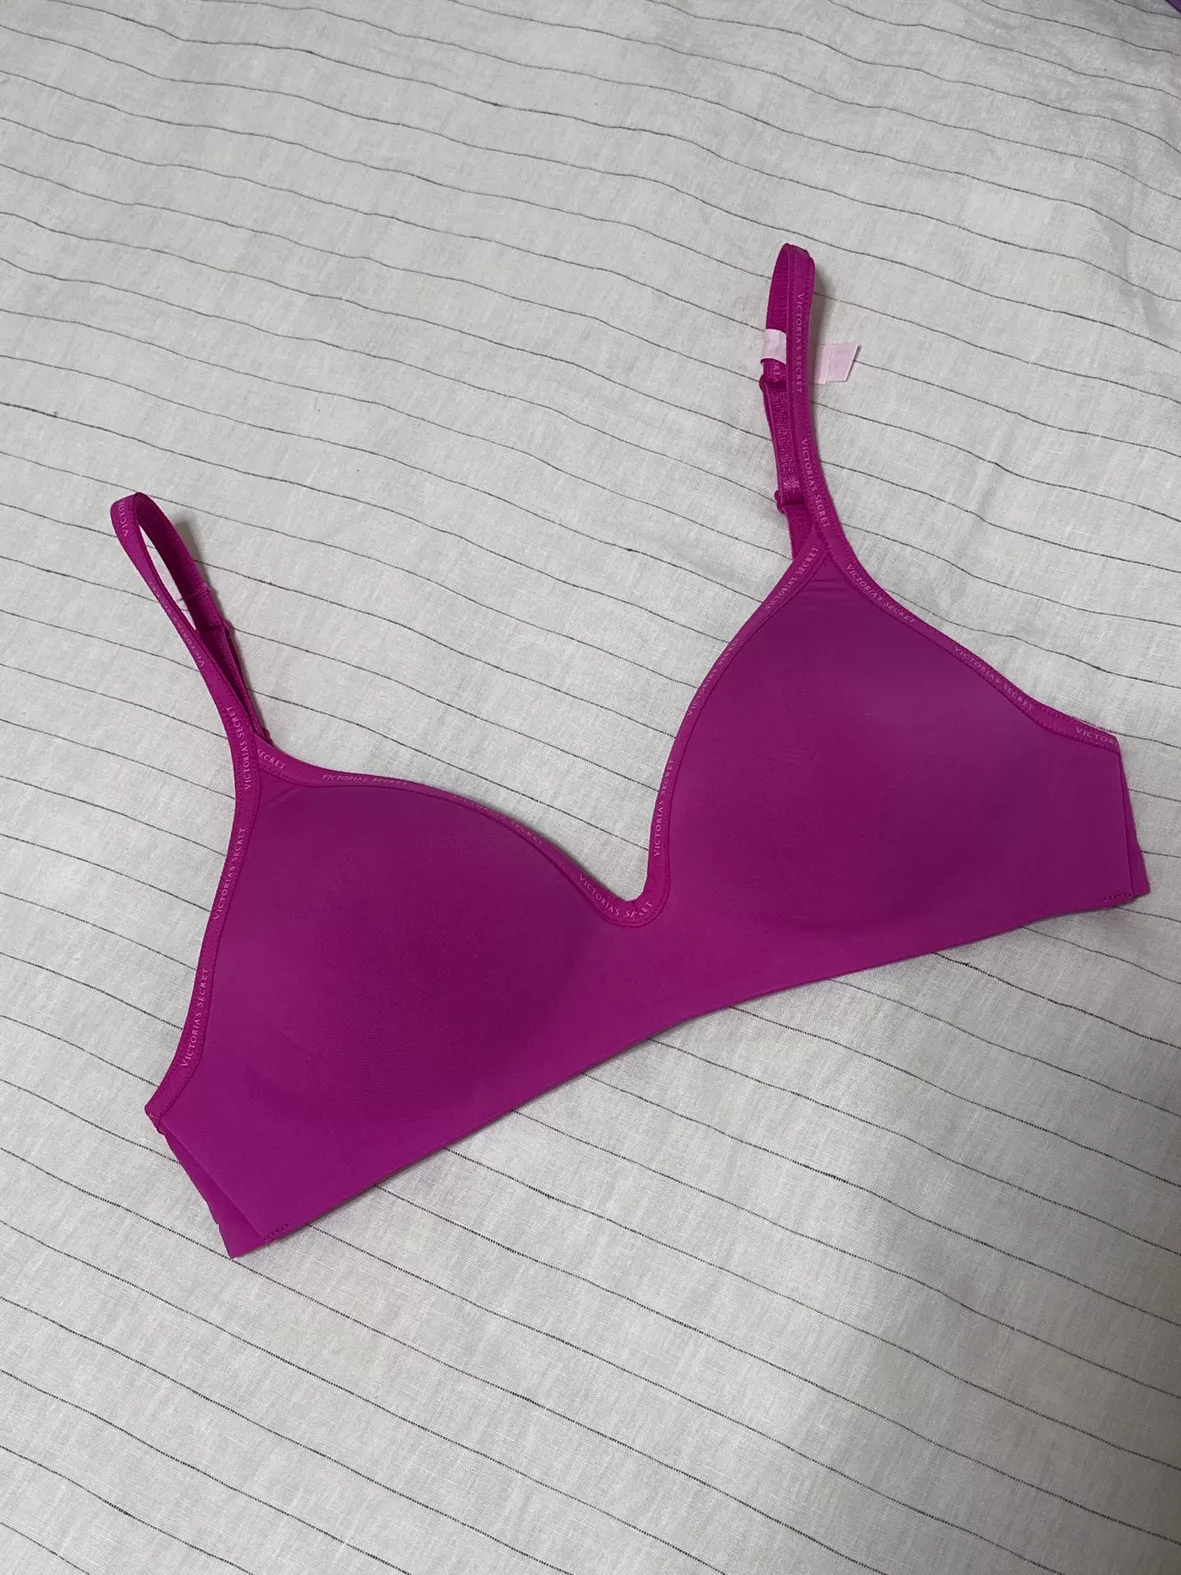 Victoria's Secret PINK - Wireless Bras = the perfect start to all